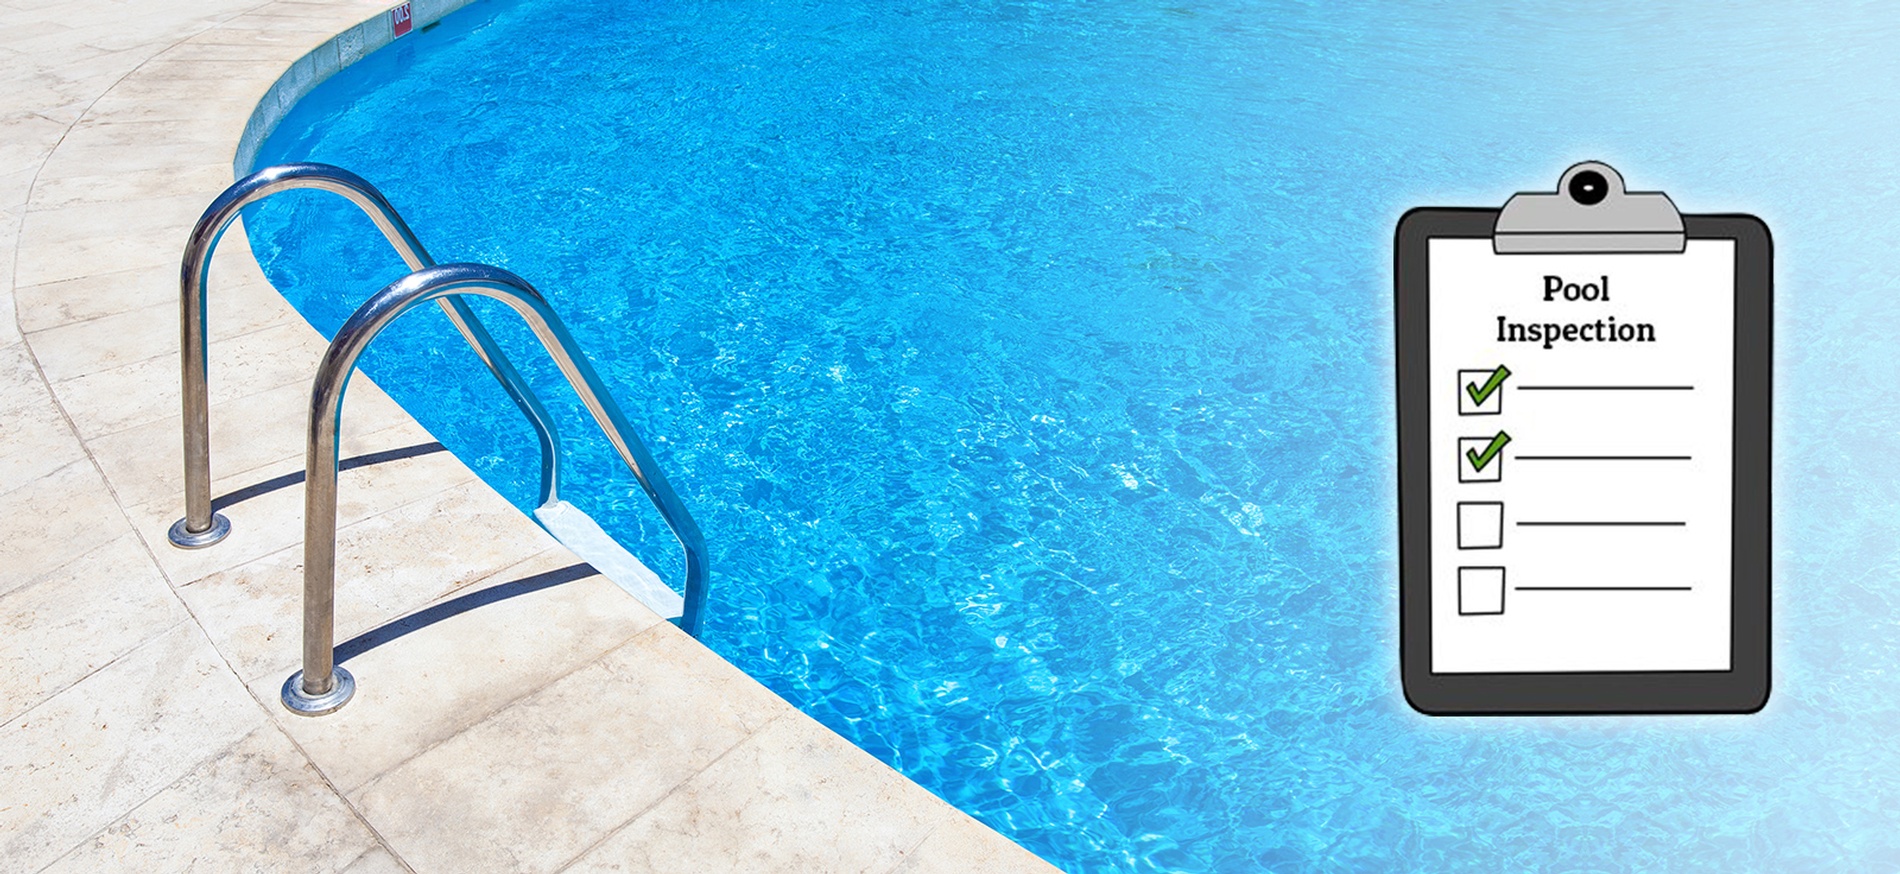  Pool/Spa Inspections